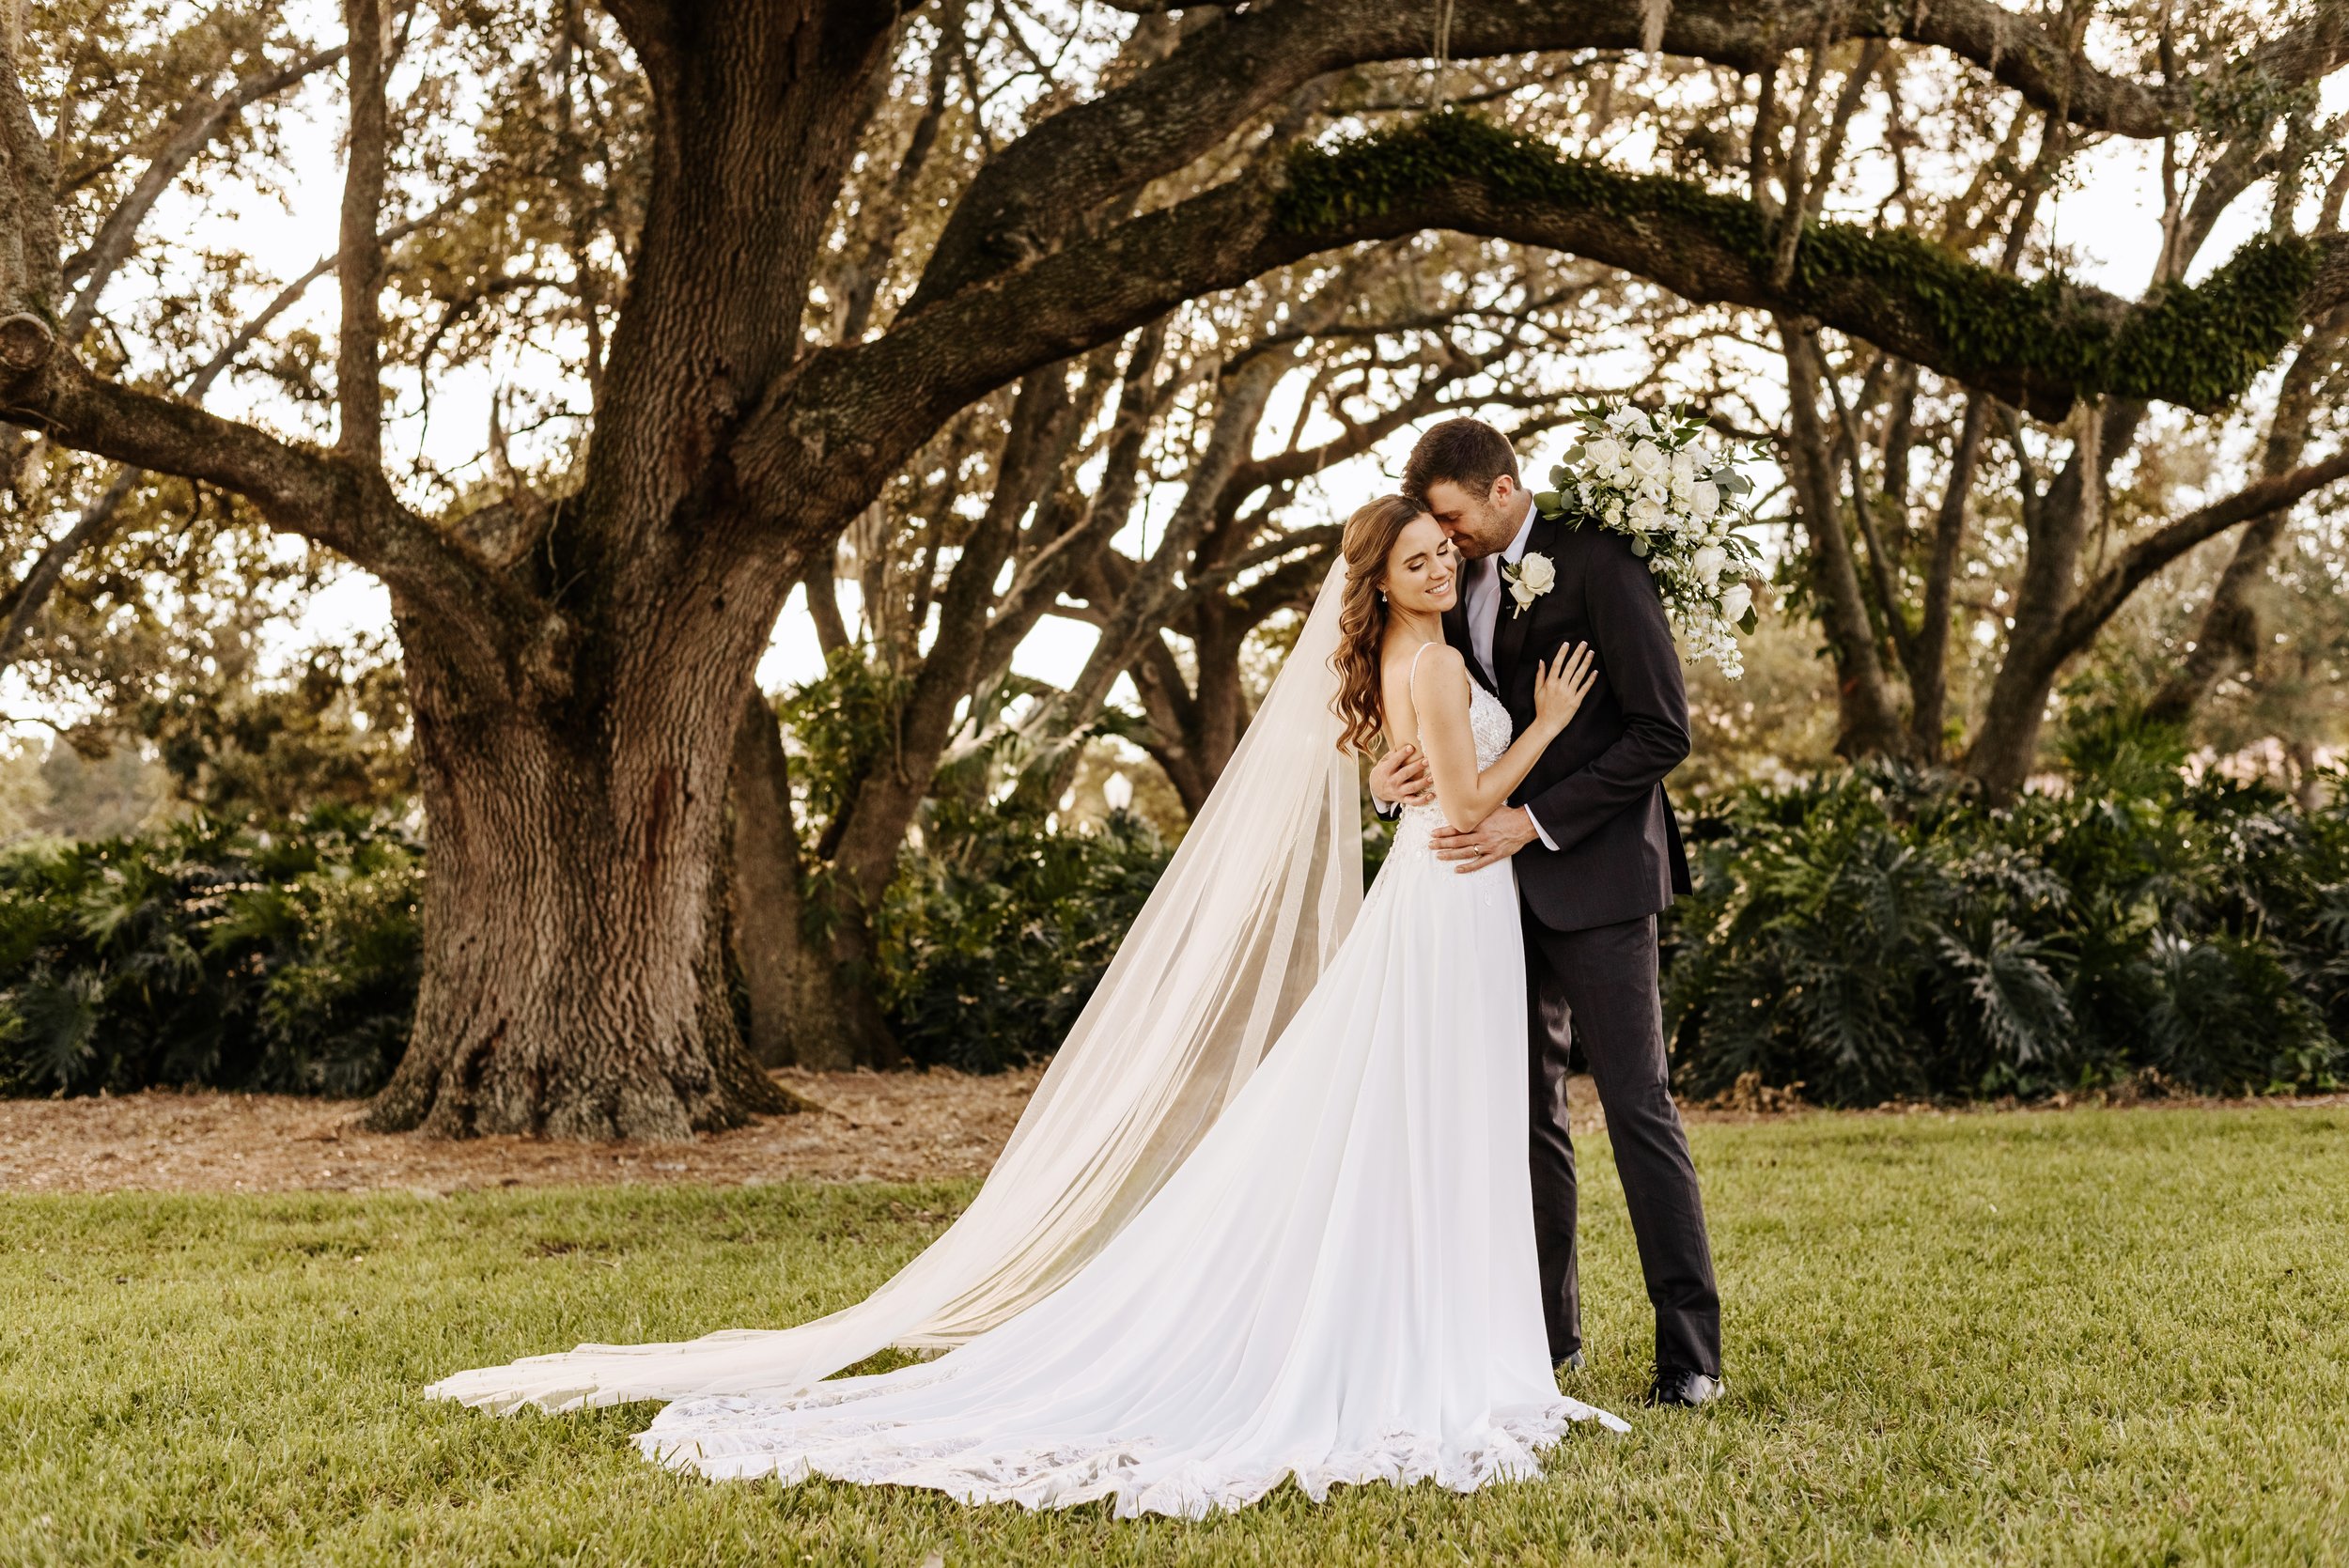 Lizzy + Kip || The Country Club of Orlando